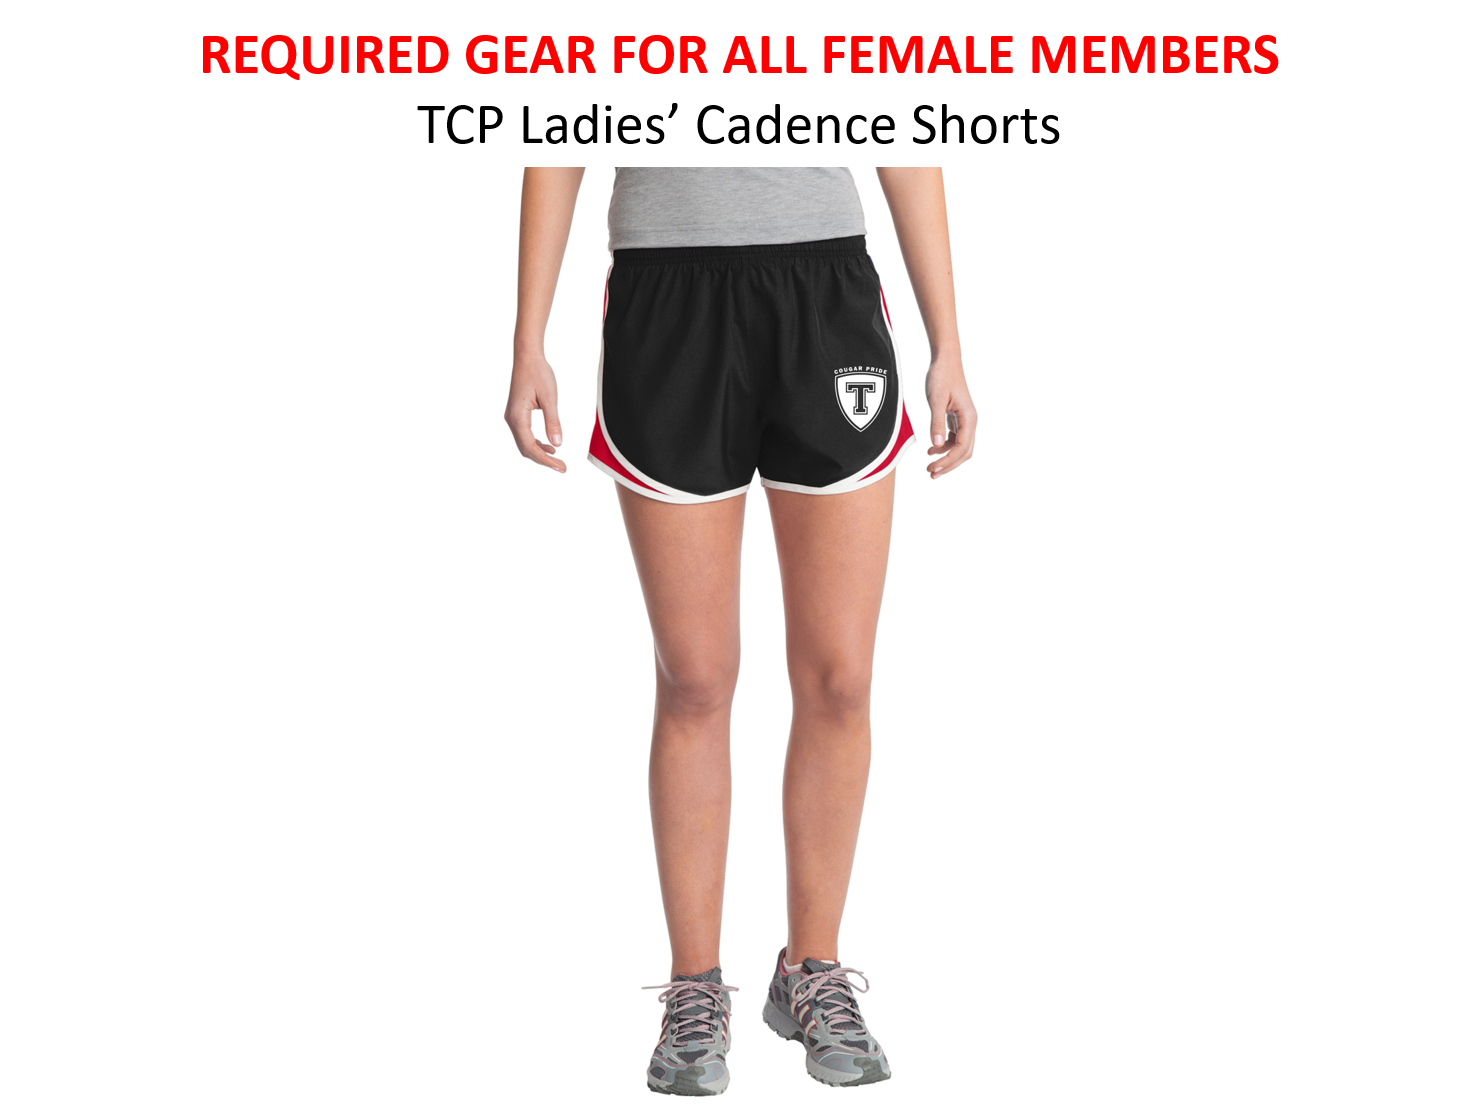 TCP Required Gear - Women's Cadence Shorts